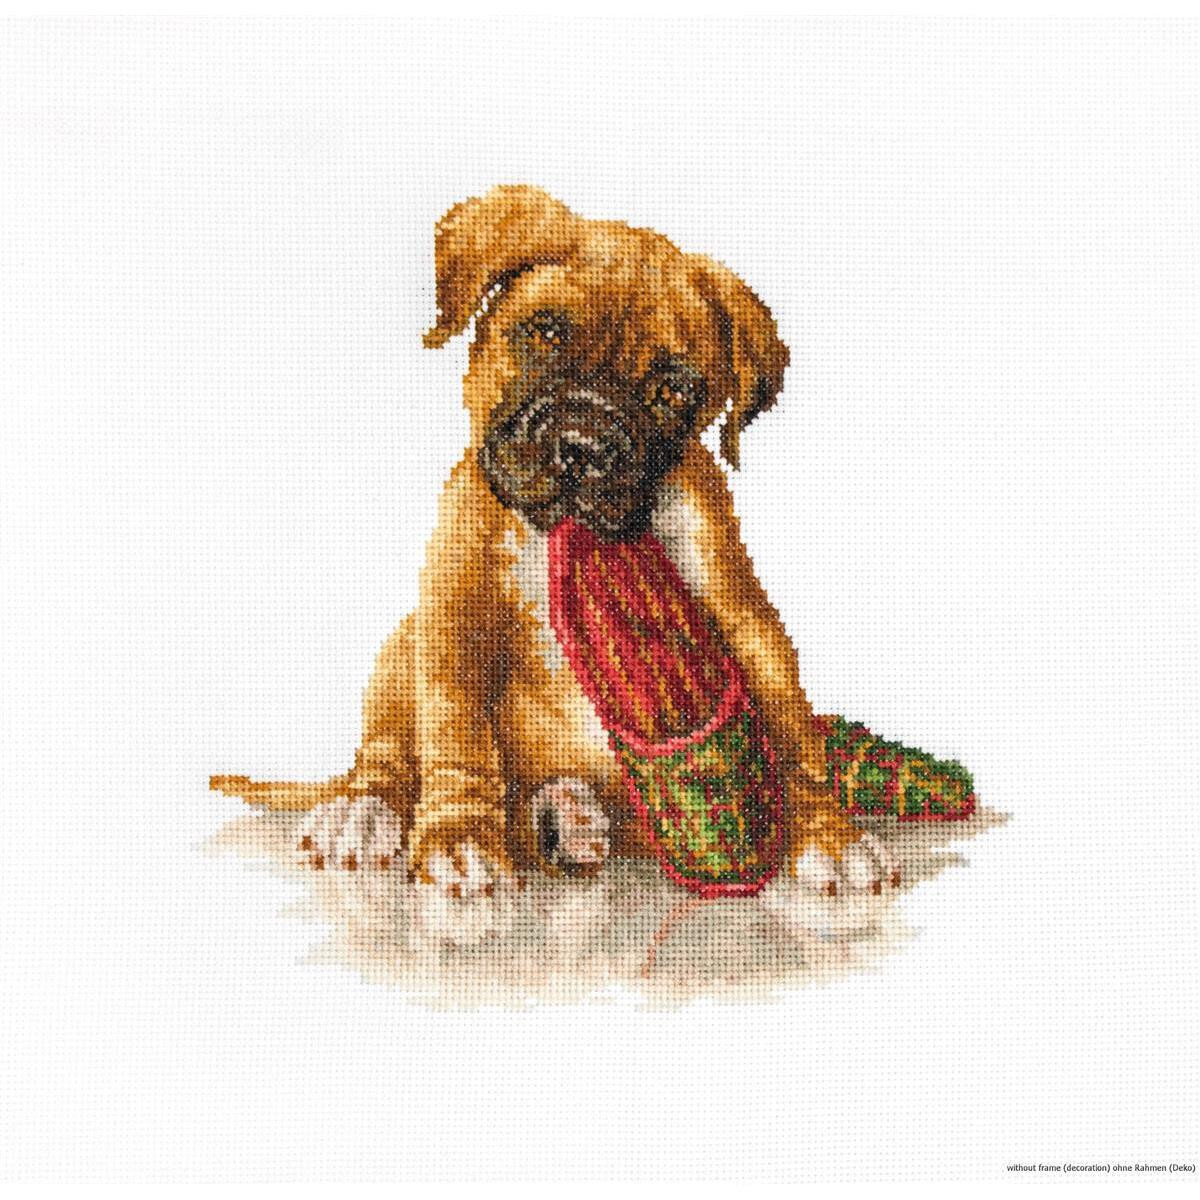 A cross stitch design depicting a small light brown puppy...